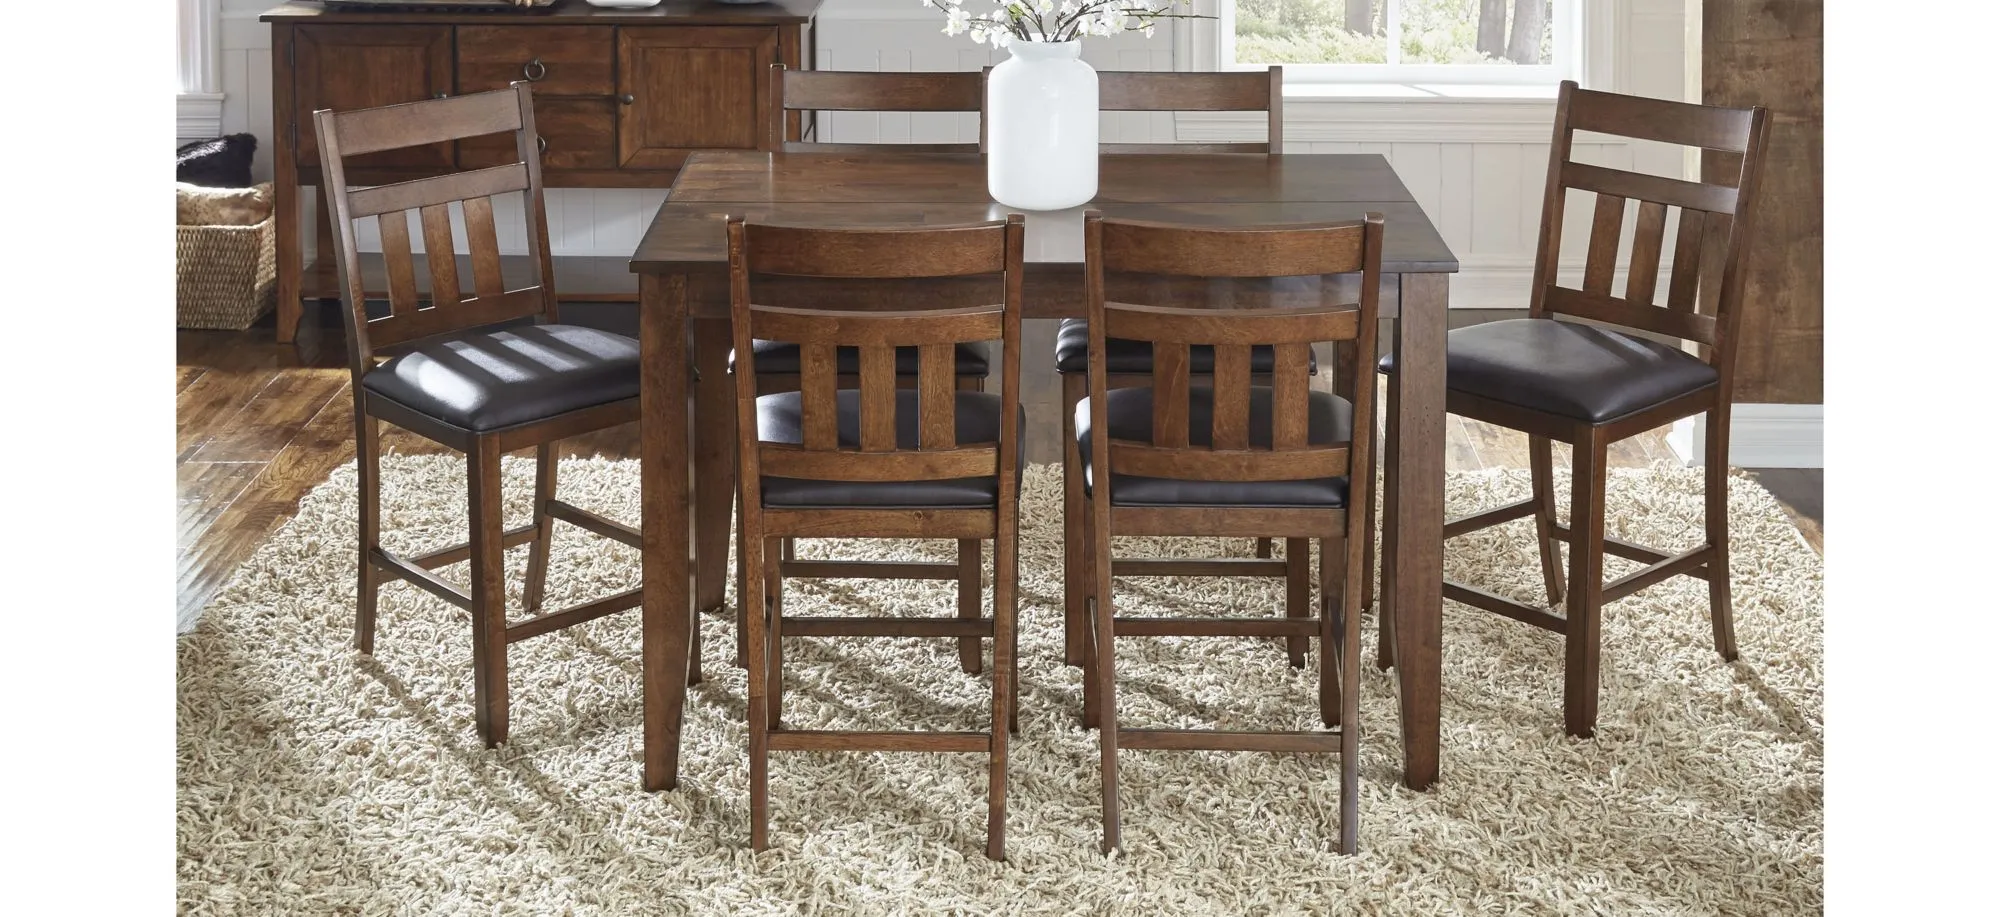 Mase Gathering 7-pc. Counter-Height Dining Set in Macciato Brown by A-America